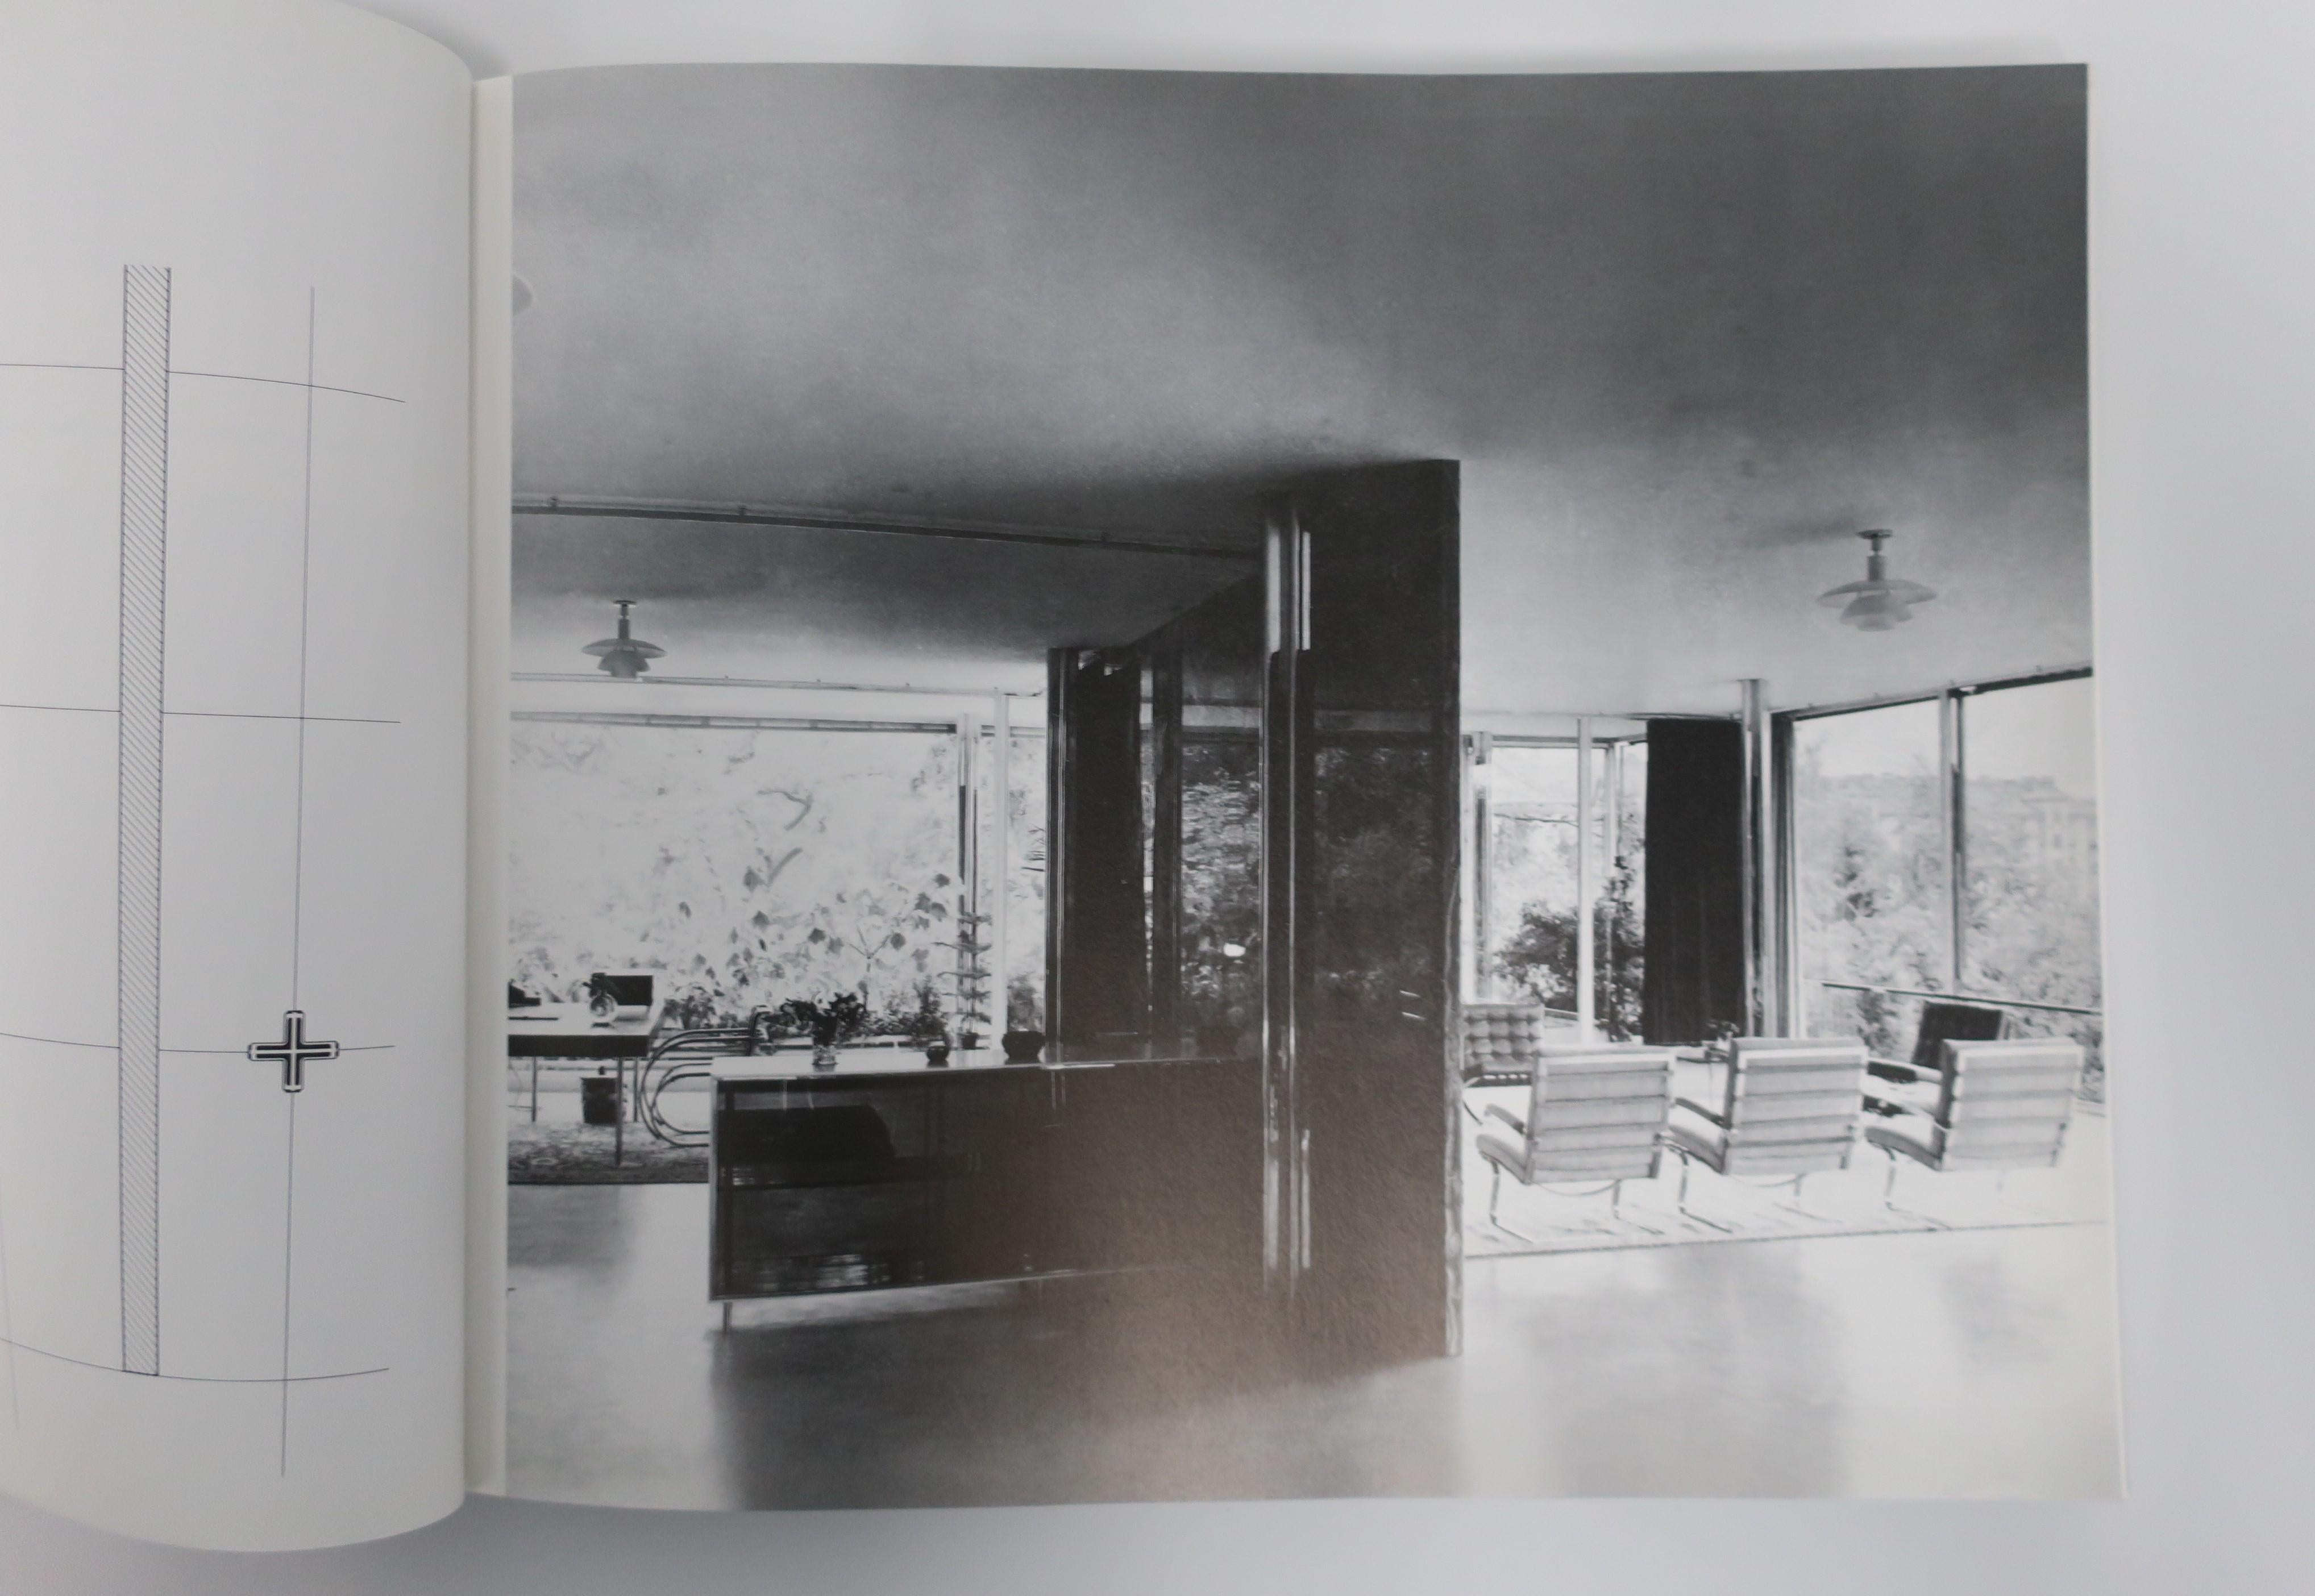 Paper Mies van der Rohe at Work, Coffee Table or Library Book